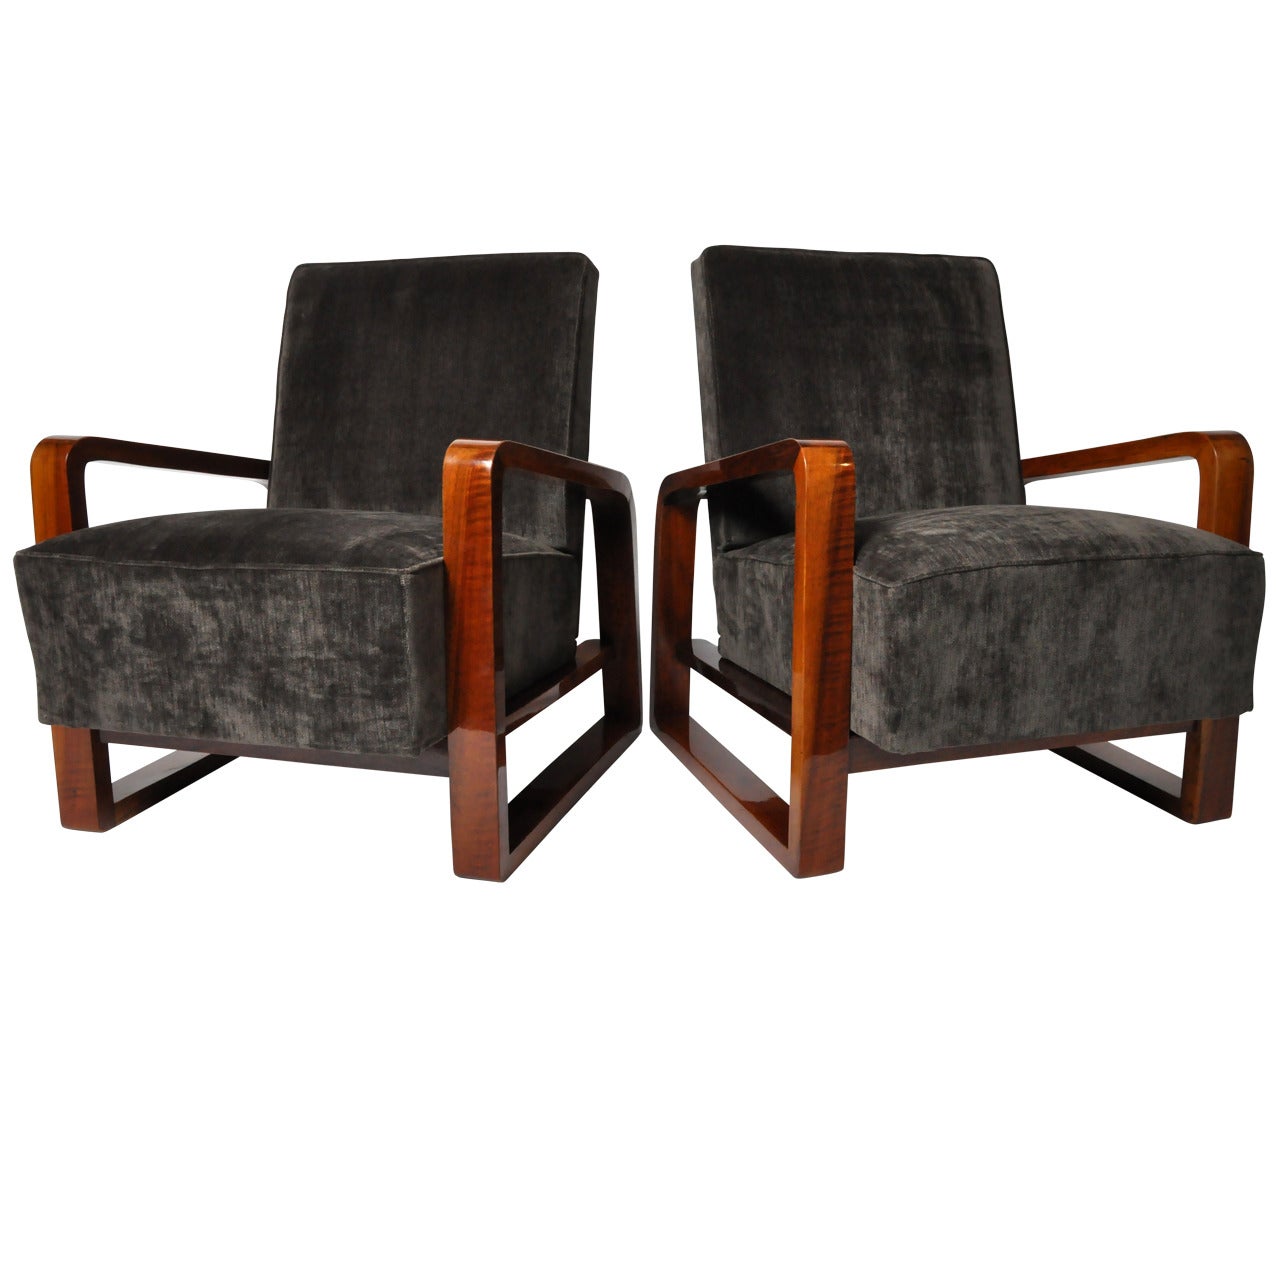 Pair of Art Deco Style Open Armchairs